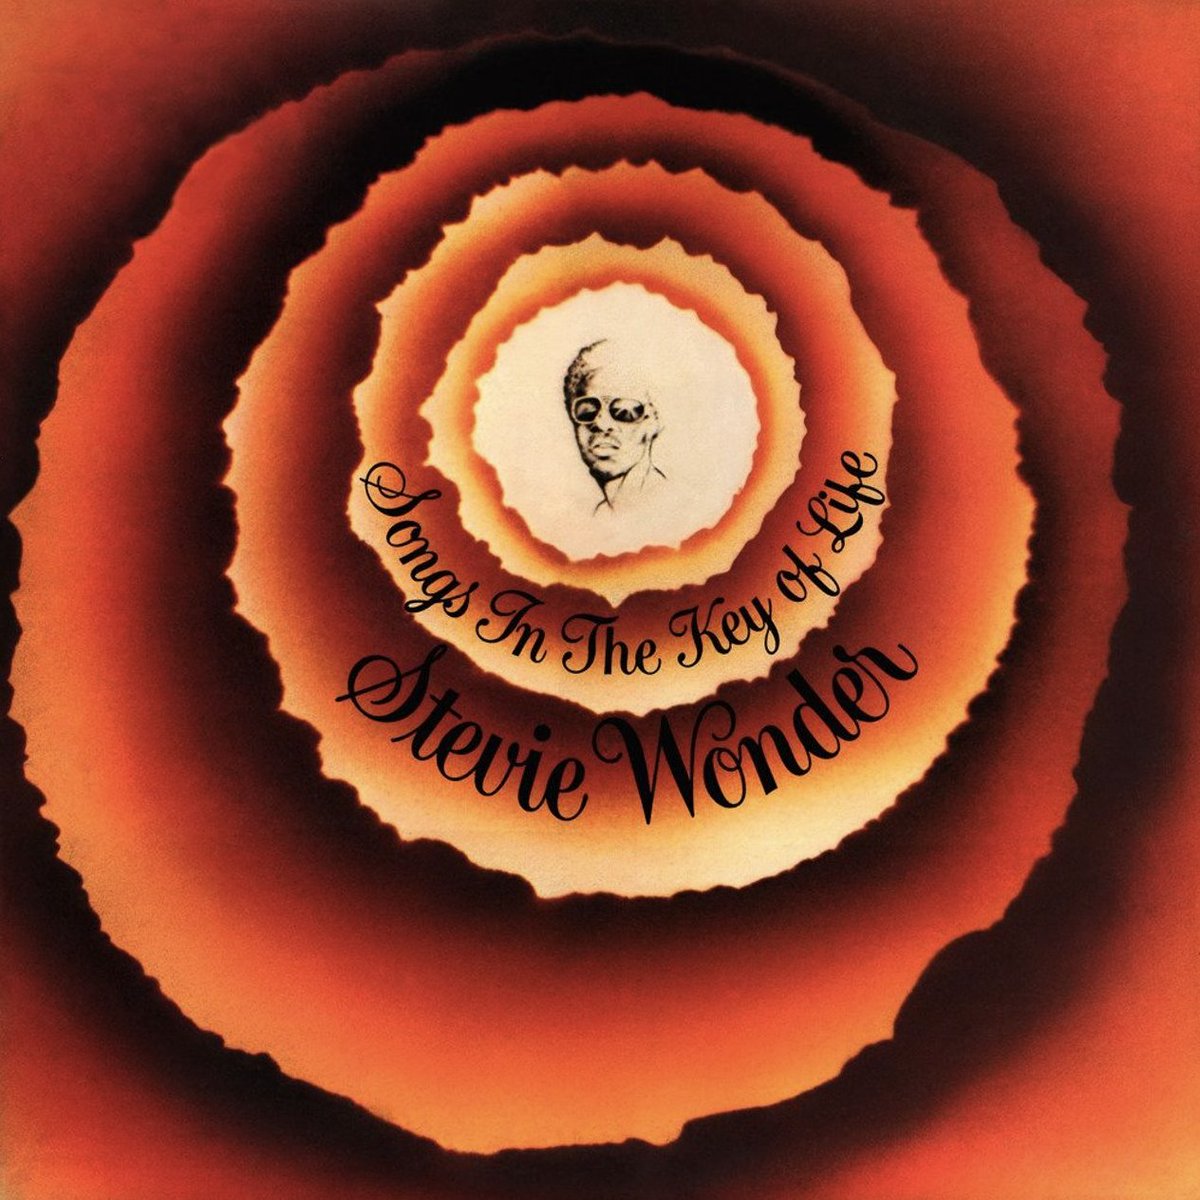 The #9 best album of the last 50 years: Stevie Wonder's Songs in the Key of Life! Tune in as we make our way to #1 in this listener-voted countdown!